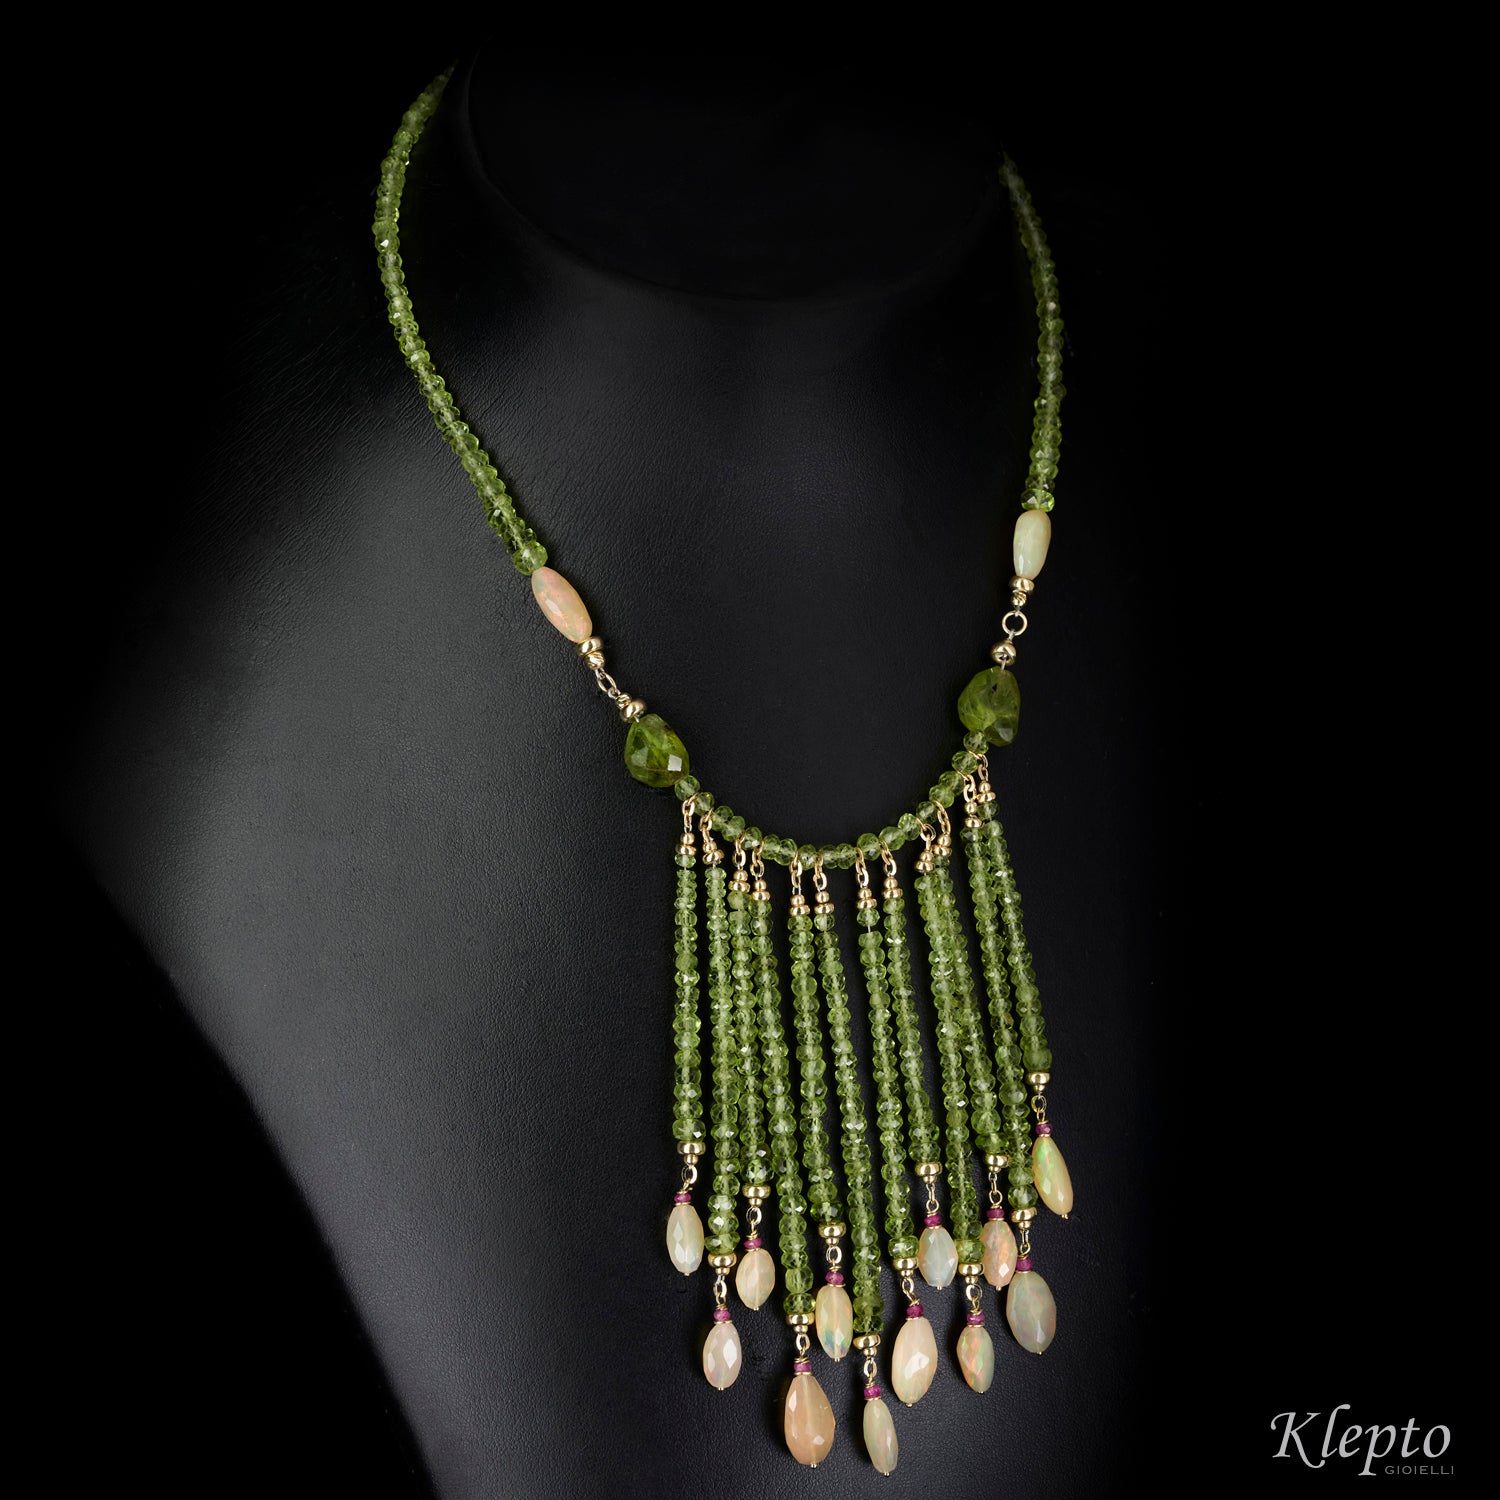 Choker necklace with cascade of Peridot and Opals